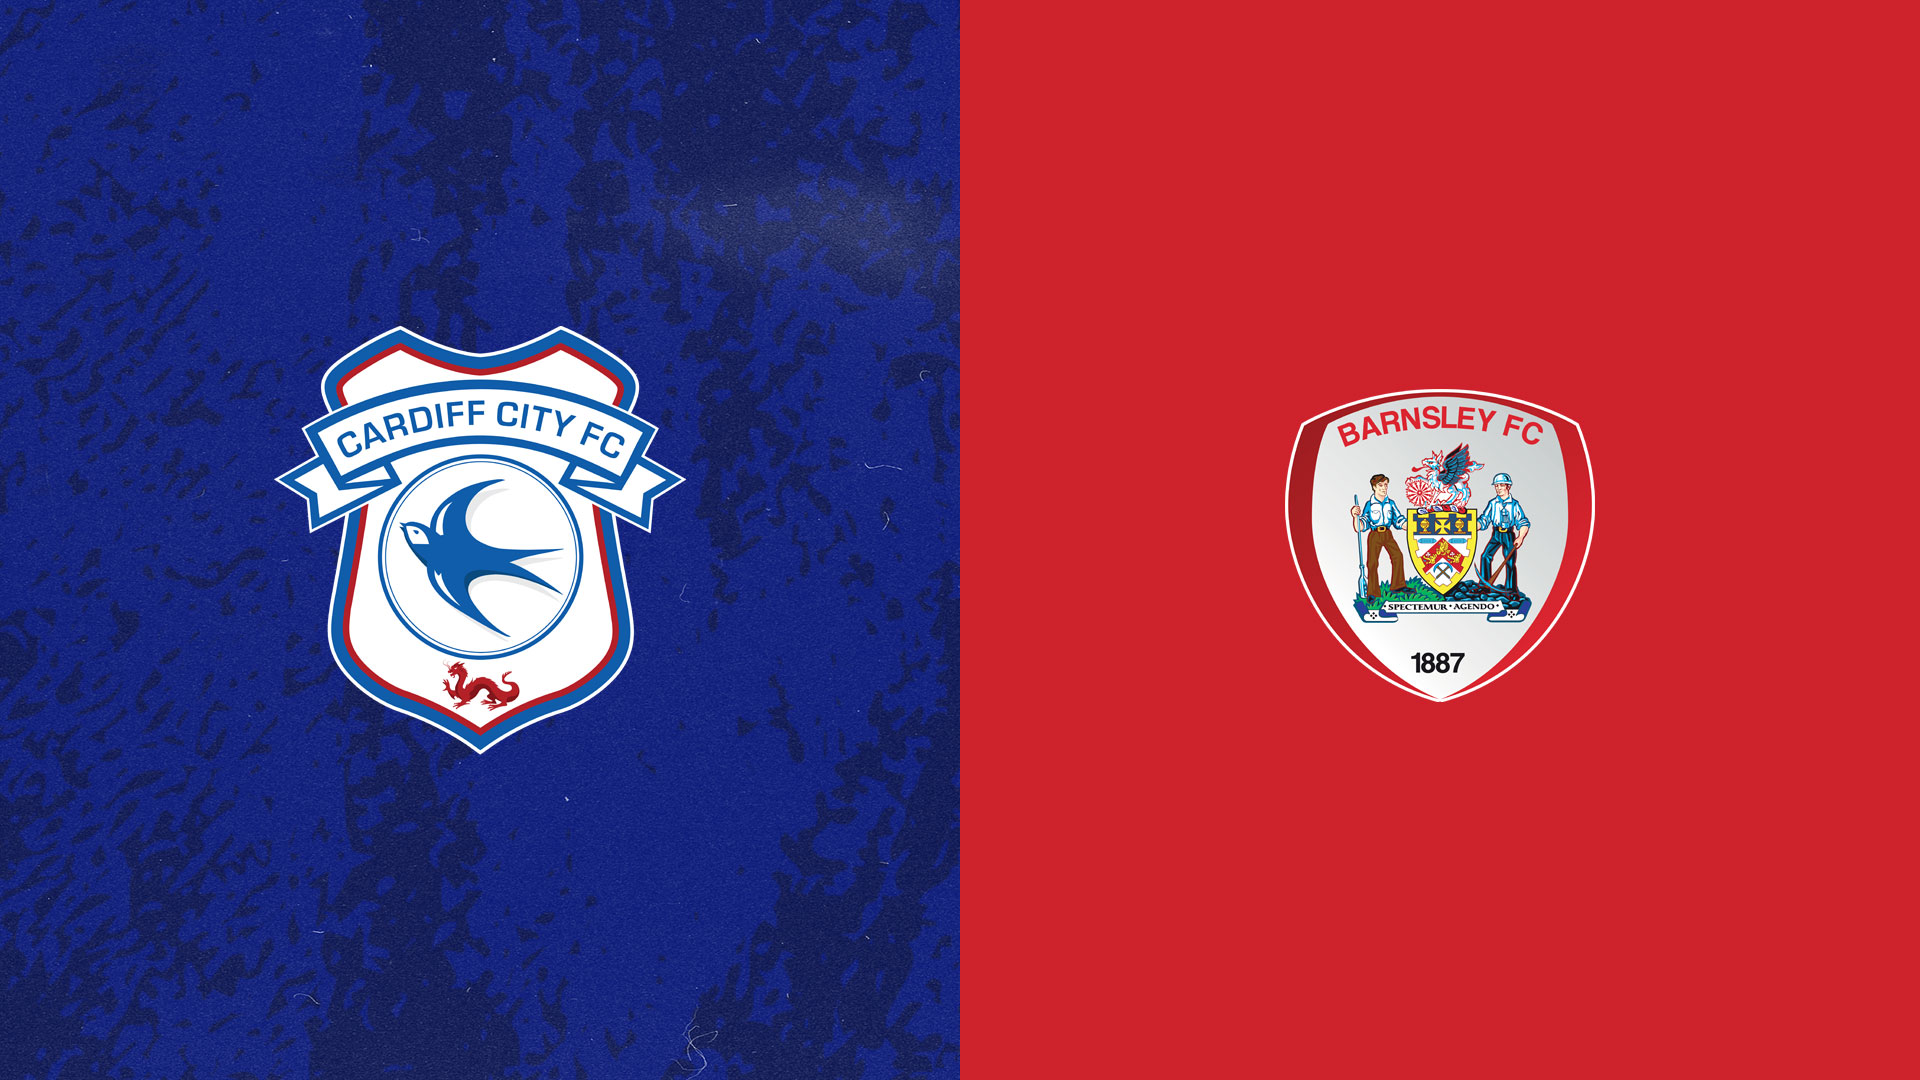 The Bluebirds face Barnsley this weekend...